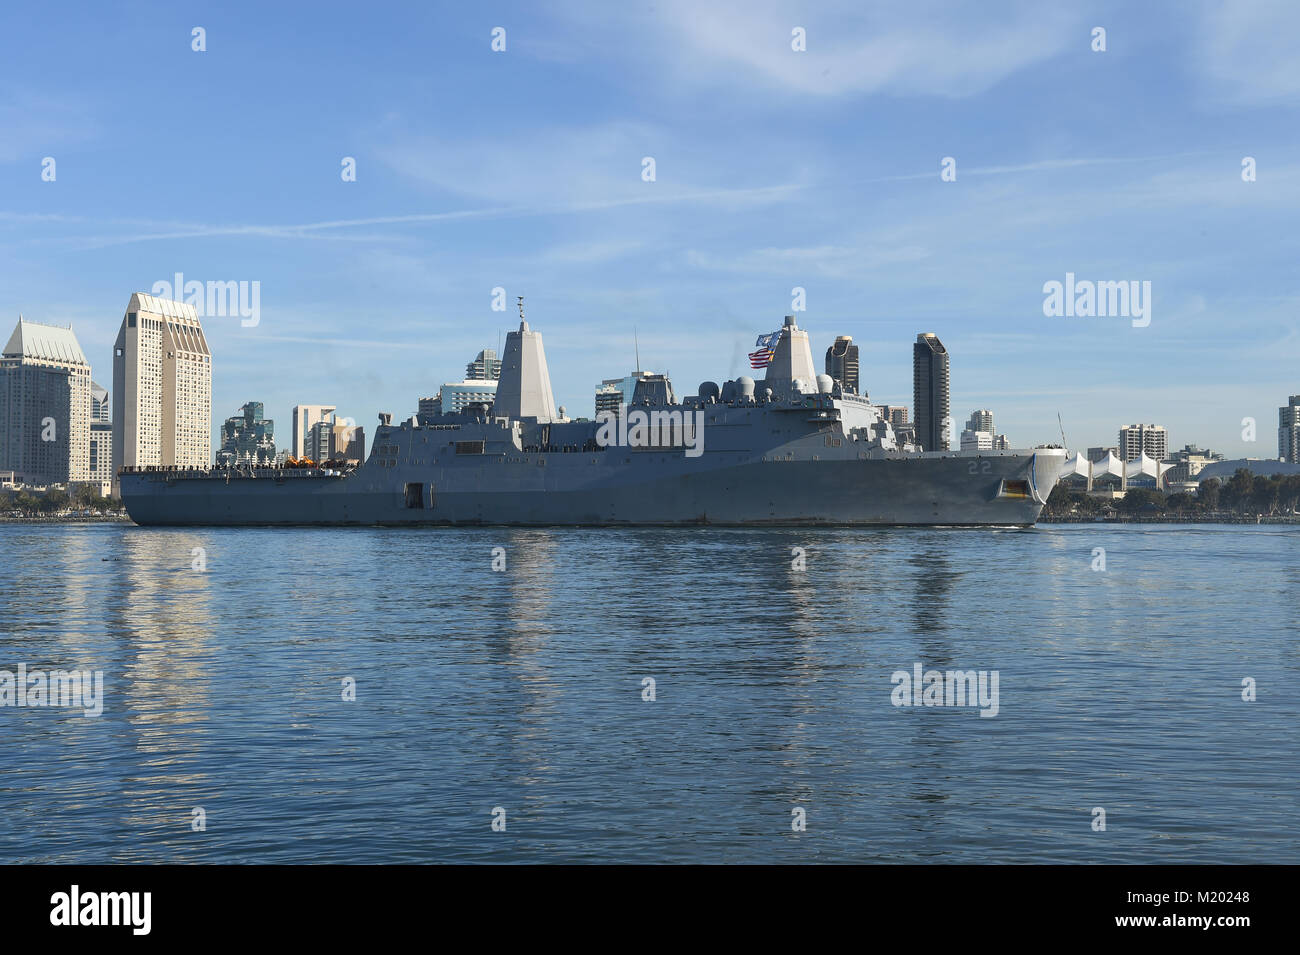 SAN DIEGO (Feb. 2, 2018) The amphibious transport dock ship USS San Diego (LPD 22) transits San Diego Bay while returning to its Naval Base San Diego homeport following their first operational deployment. America, part of the America Amphibious Ready Group, with embarked 15th Marine Expeditionary Unit, is returning from a regularly scheduled deployment to the Western Pacific and Middle East. The U.S. Navy has patrolled the Indo-Pacific region routinely for more than 70 years promoting peace and security. (U.S. Navy photo by Melissa K. Russell/Released) Stock Photo